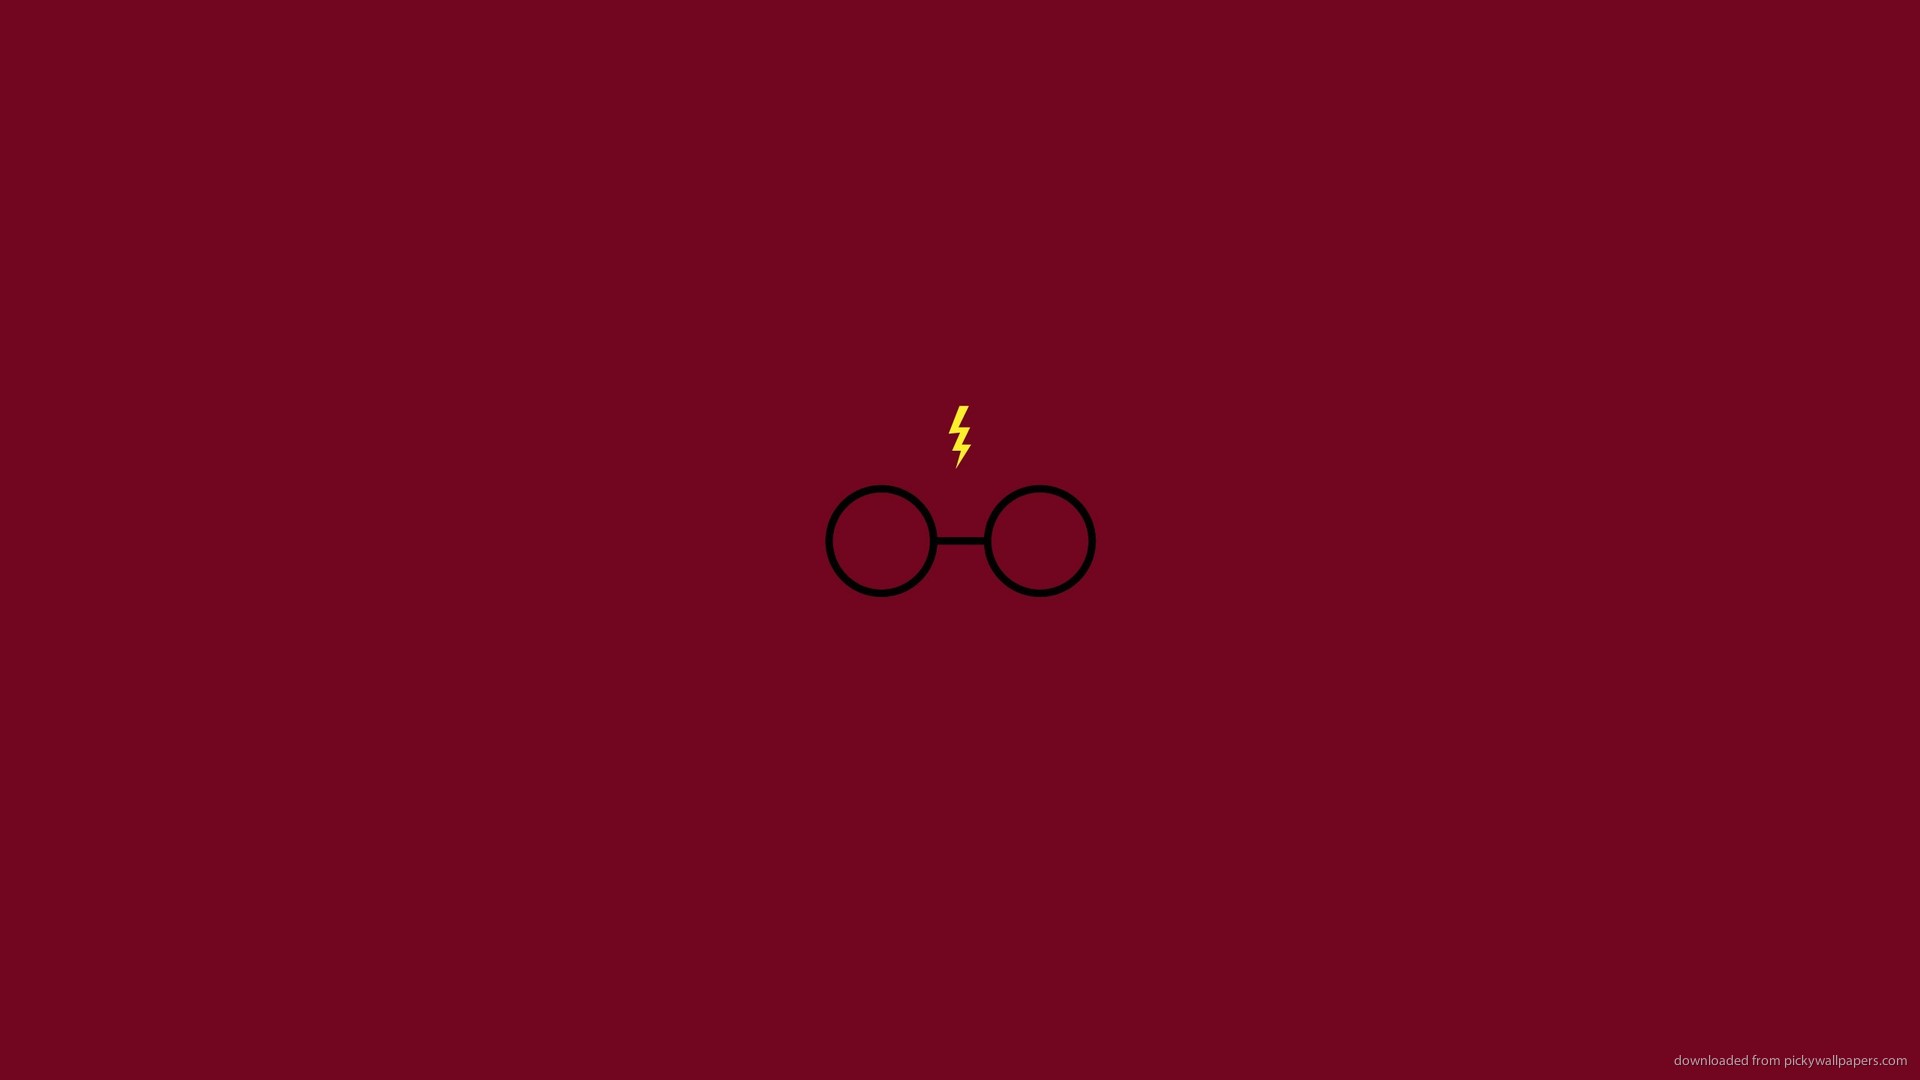 Minimalistic Harry Potter Wallpaper For iPhone 4 1920x1080